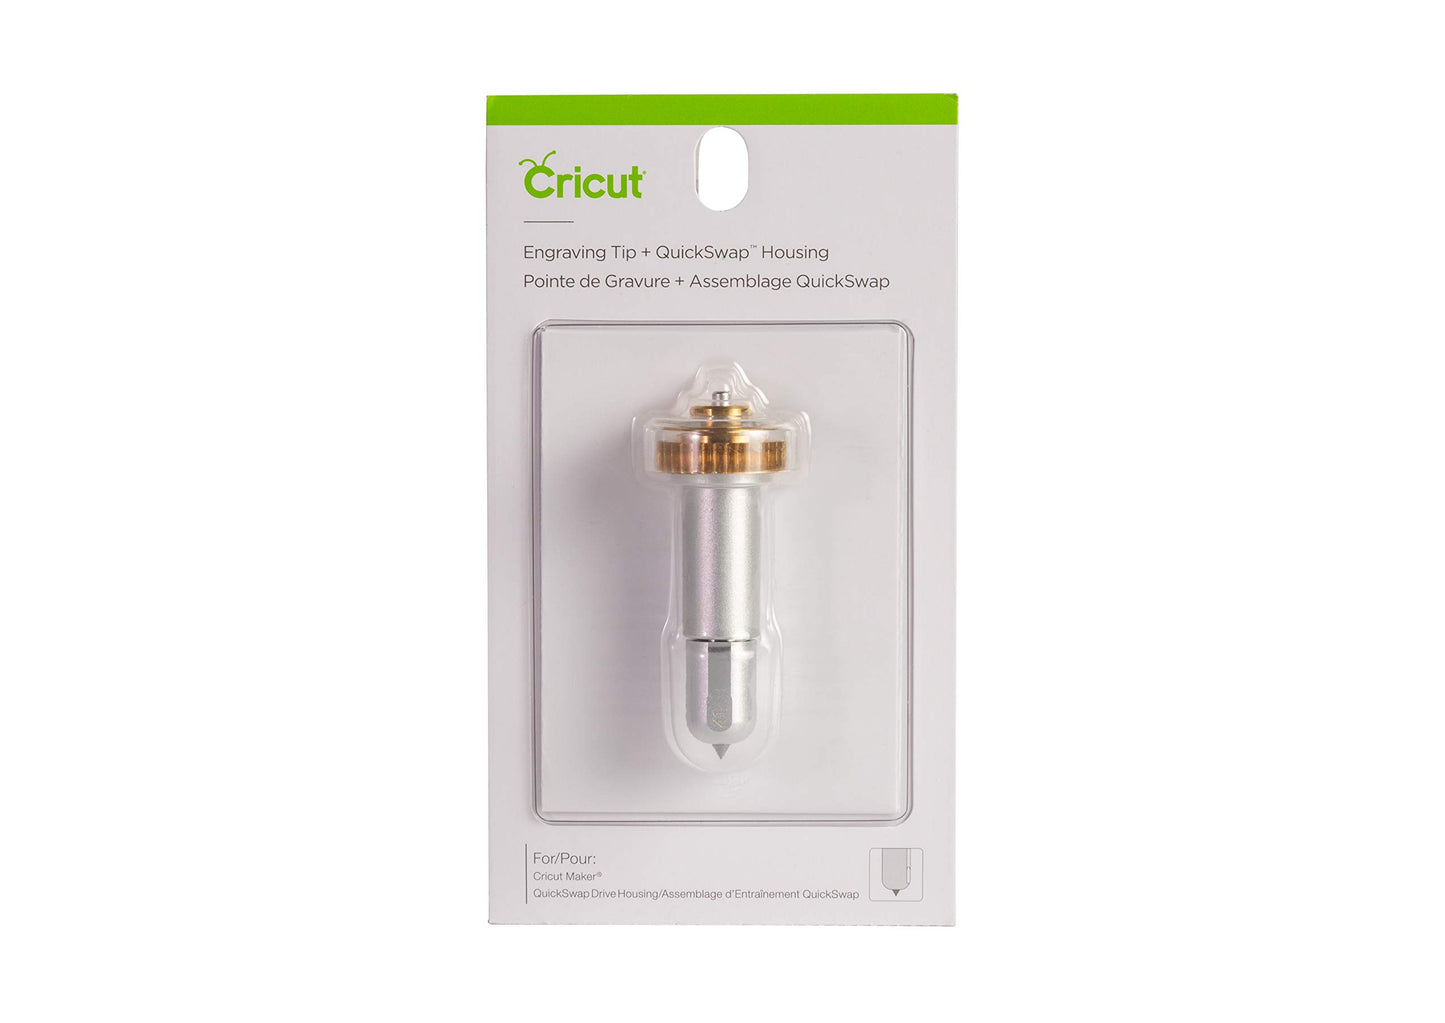 Cricut Engraving Tip + QuickSwap Housing, Premium Carbide Steel Engraving Tip, Inscribes Lasting Design on Glass, Metal & More, Compatible with